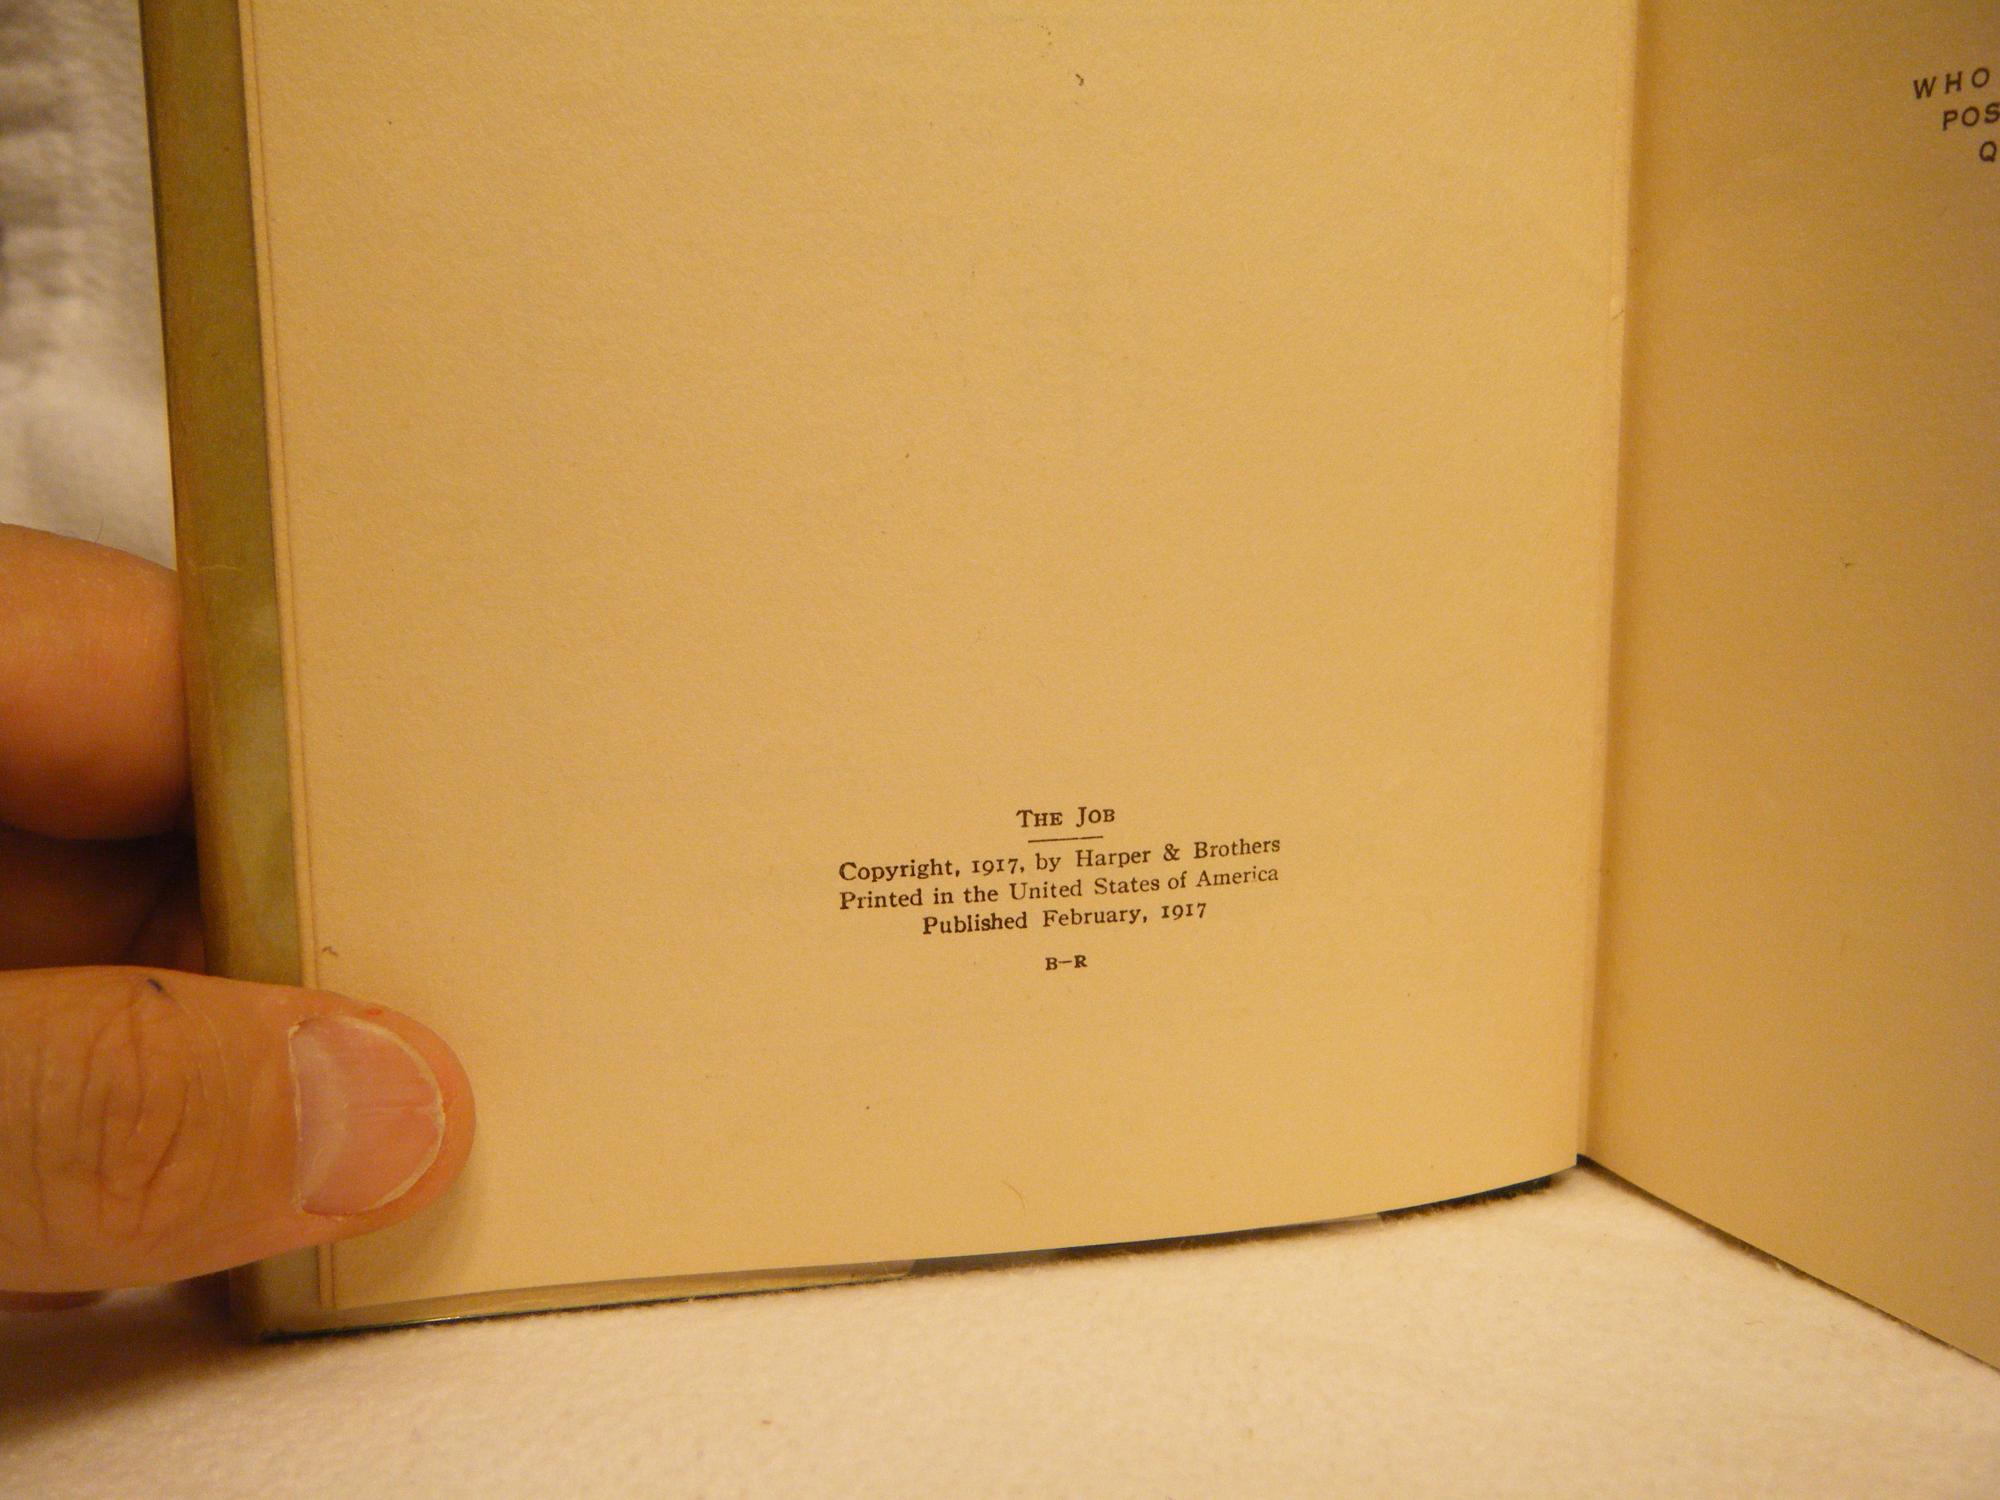 The Job by Lewis, Sinclair: Very Good Hardcover (1917) First Edition ...